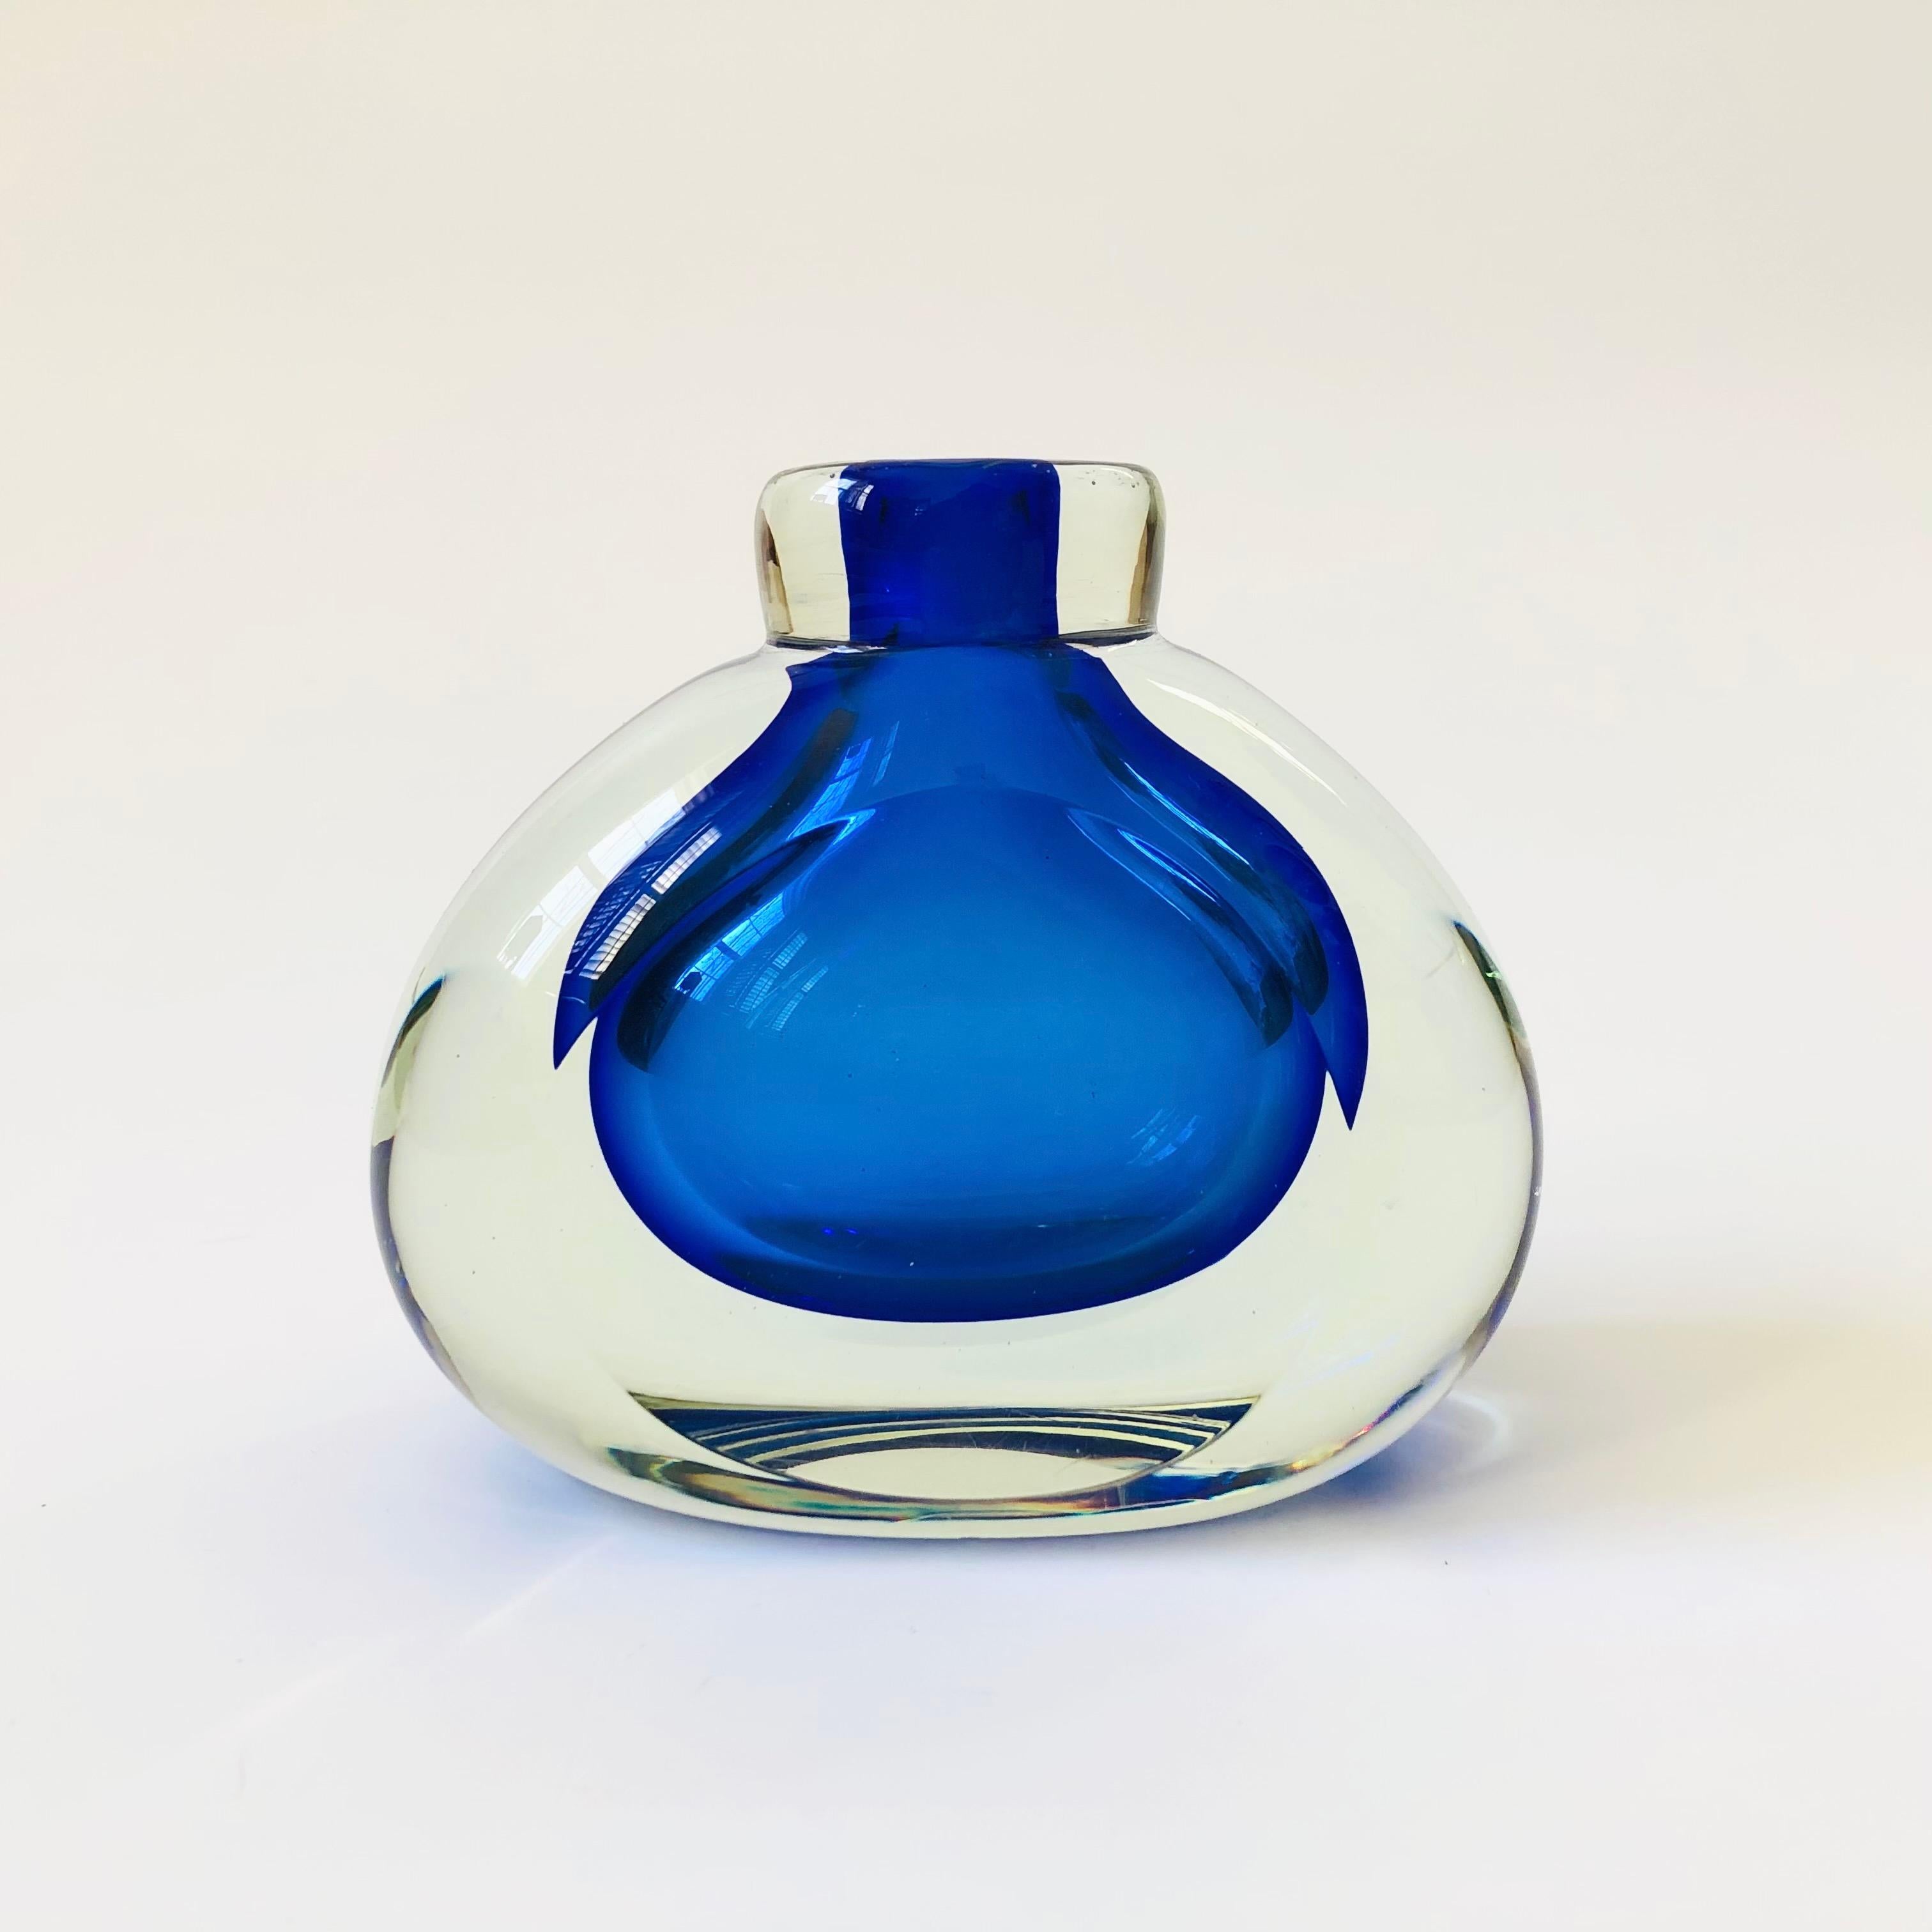 A beautiful vintage sommerso style art glass vase. Features vibrant cobalt blue interior glass surrounded by thick clear outer glass. Flattened sides. A beautiful sculptural accent piece.

